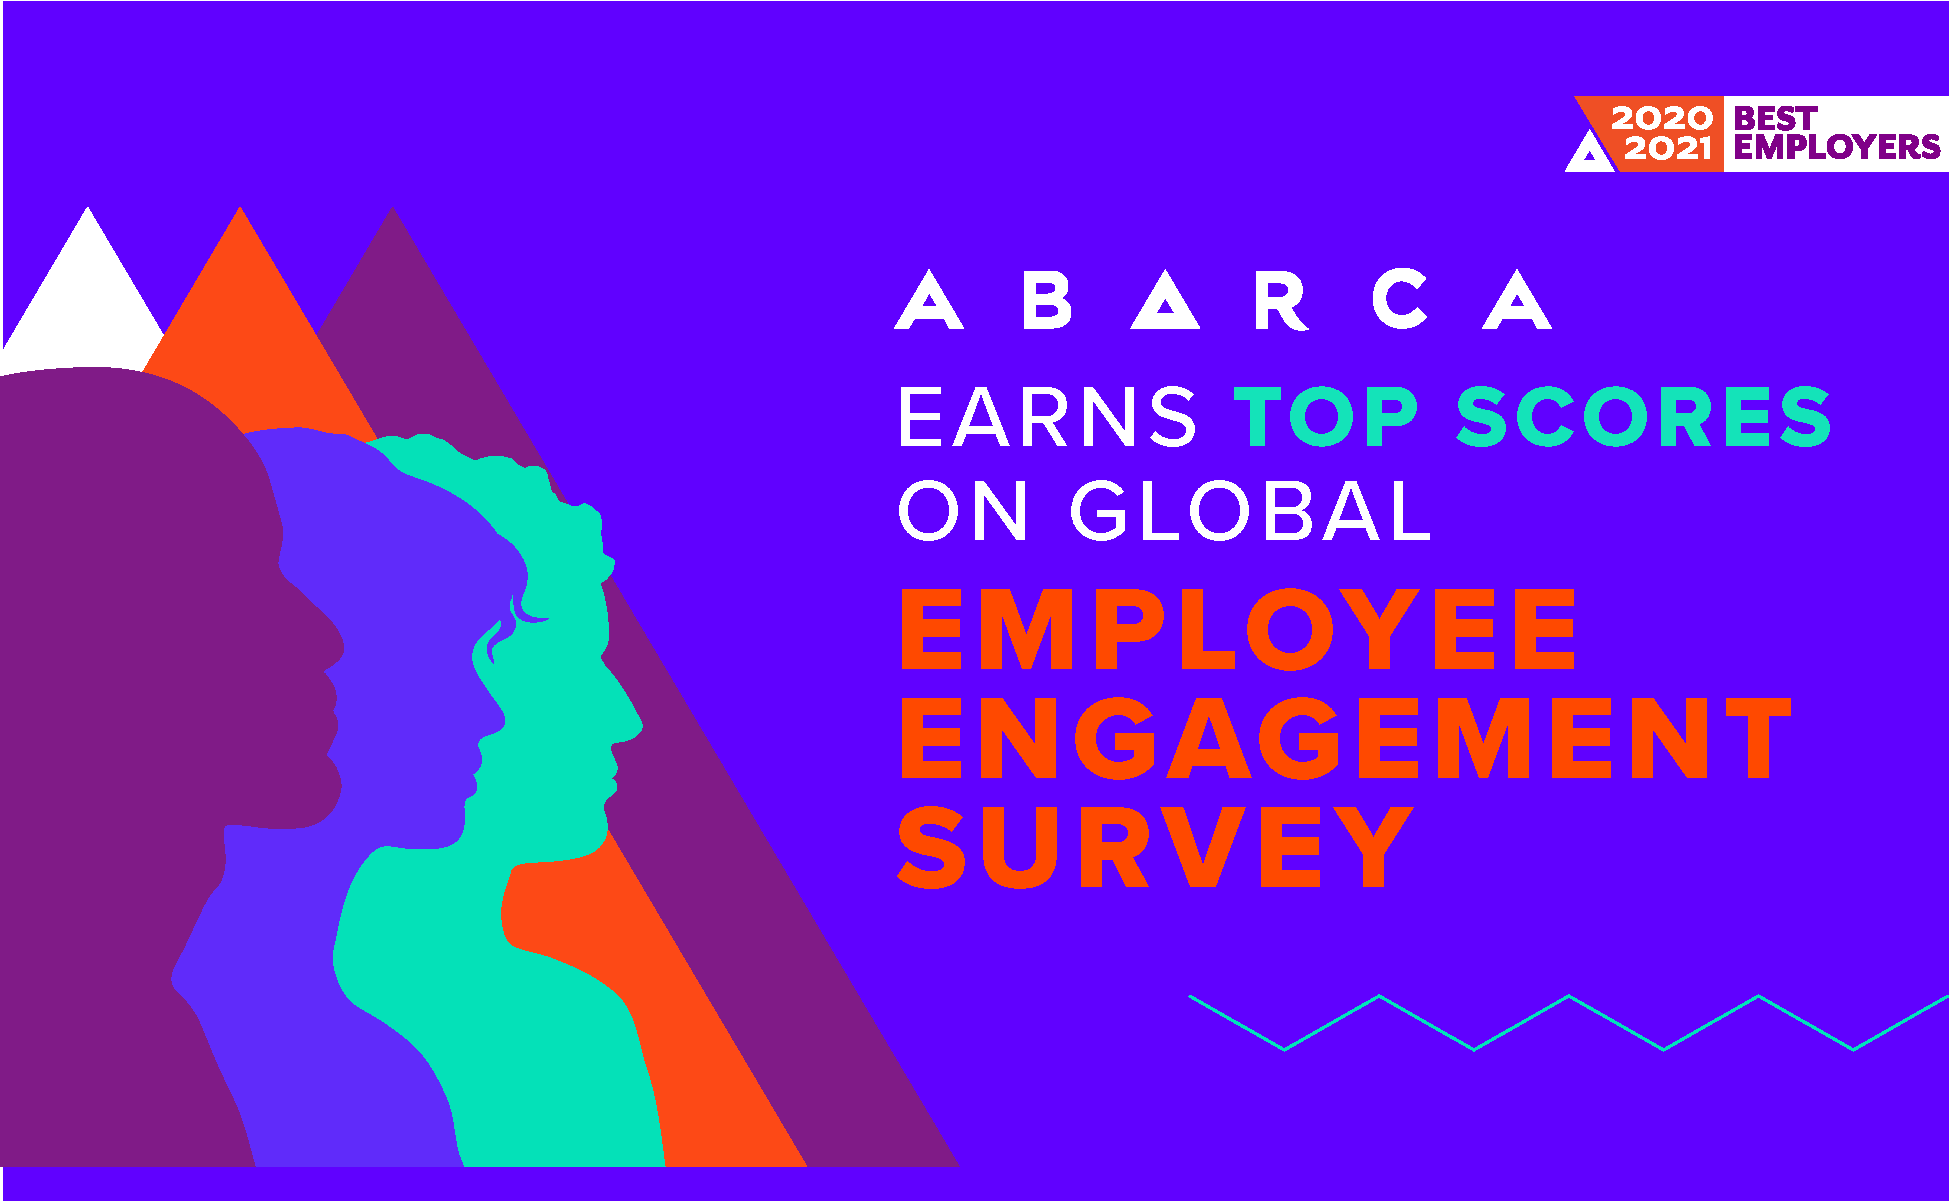 Abarca earns top scores on Kincentric's Global Employee Engagement Survey